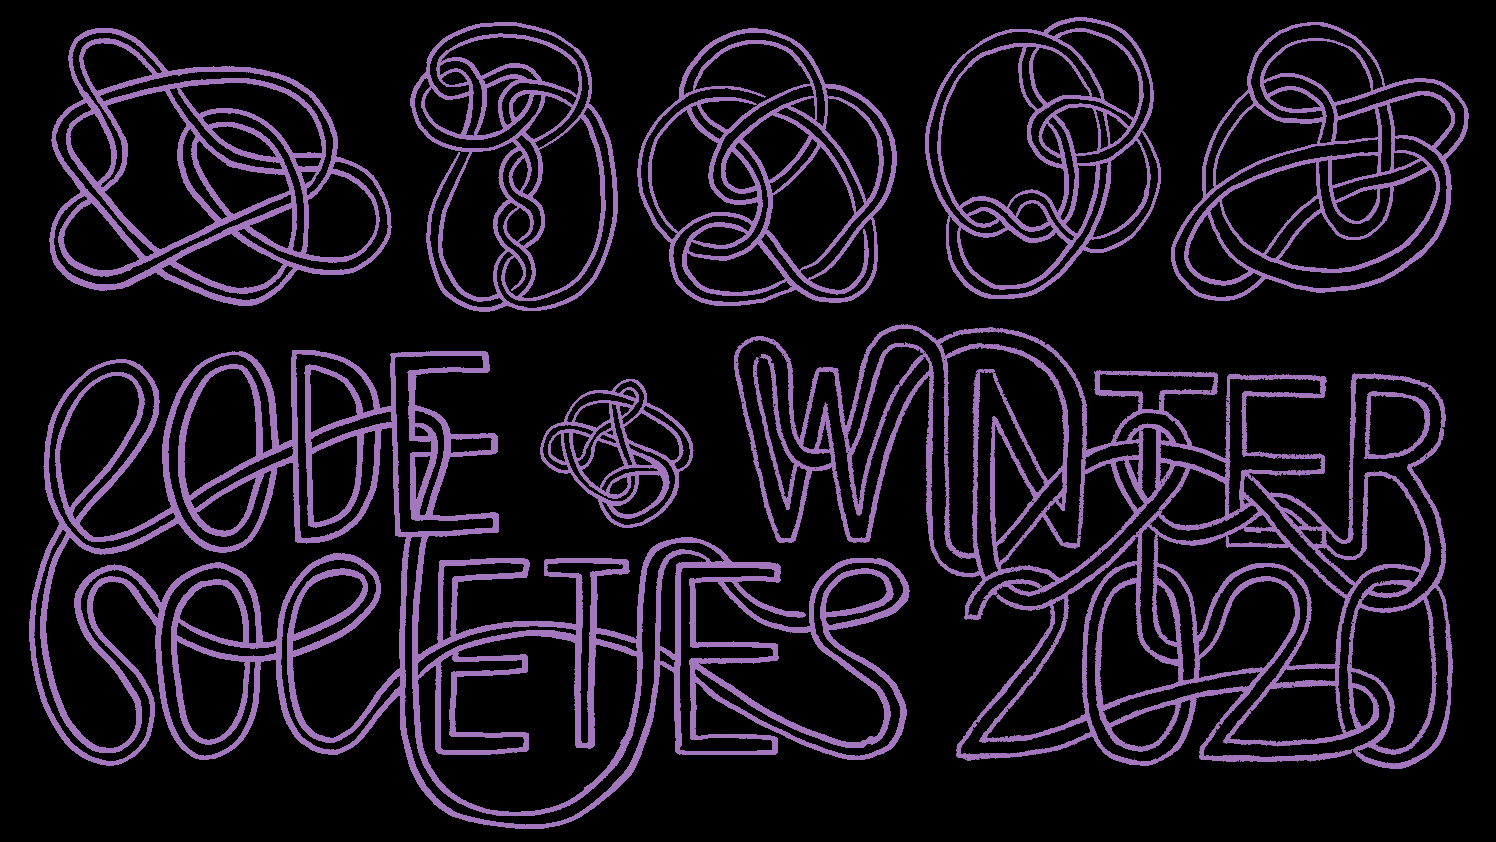 Code Societies Winter 2020 logo with long connected ropey letters